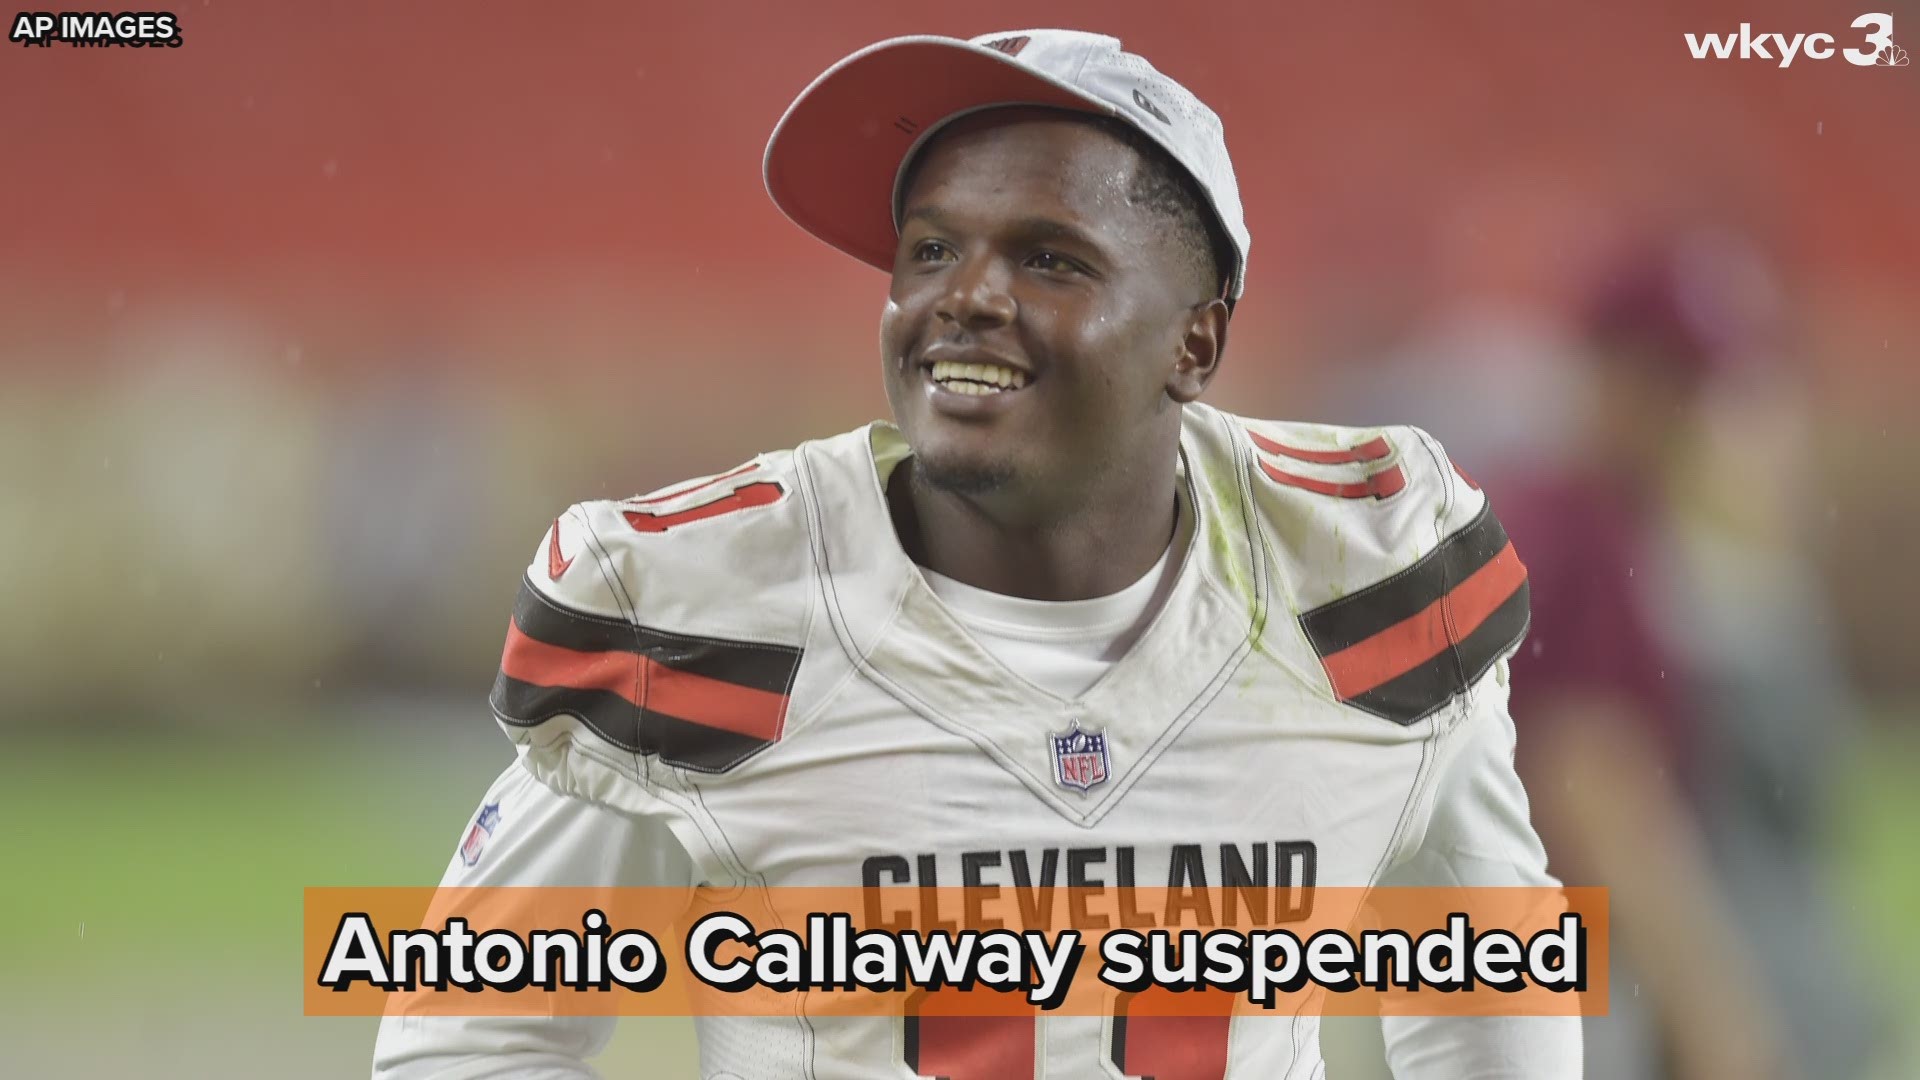 Cleveland Browns wide receiver Antonio Callaway has been suspended 4 games as the result of a violation of the NFL's substance abuse policy.